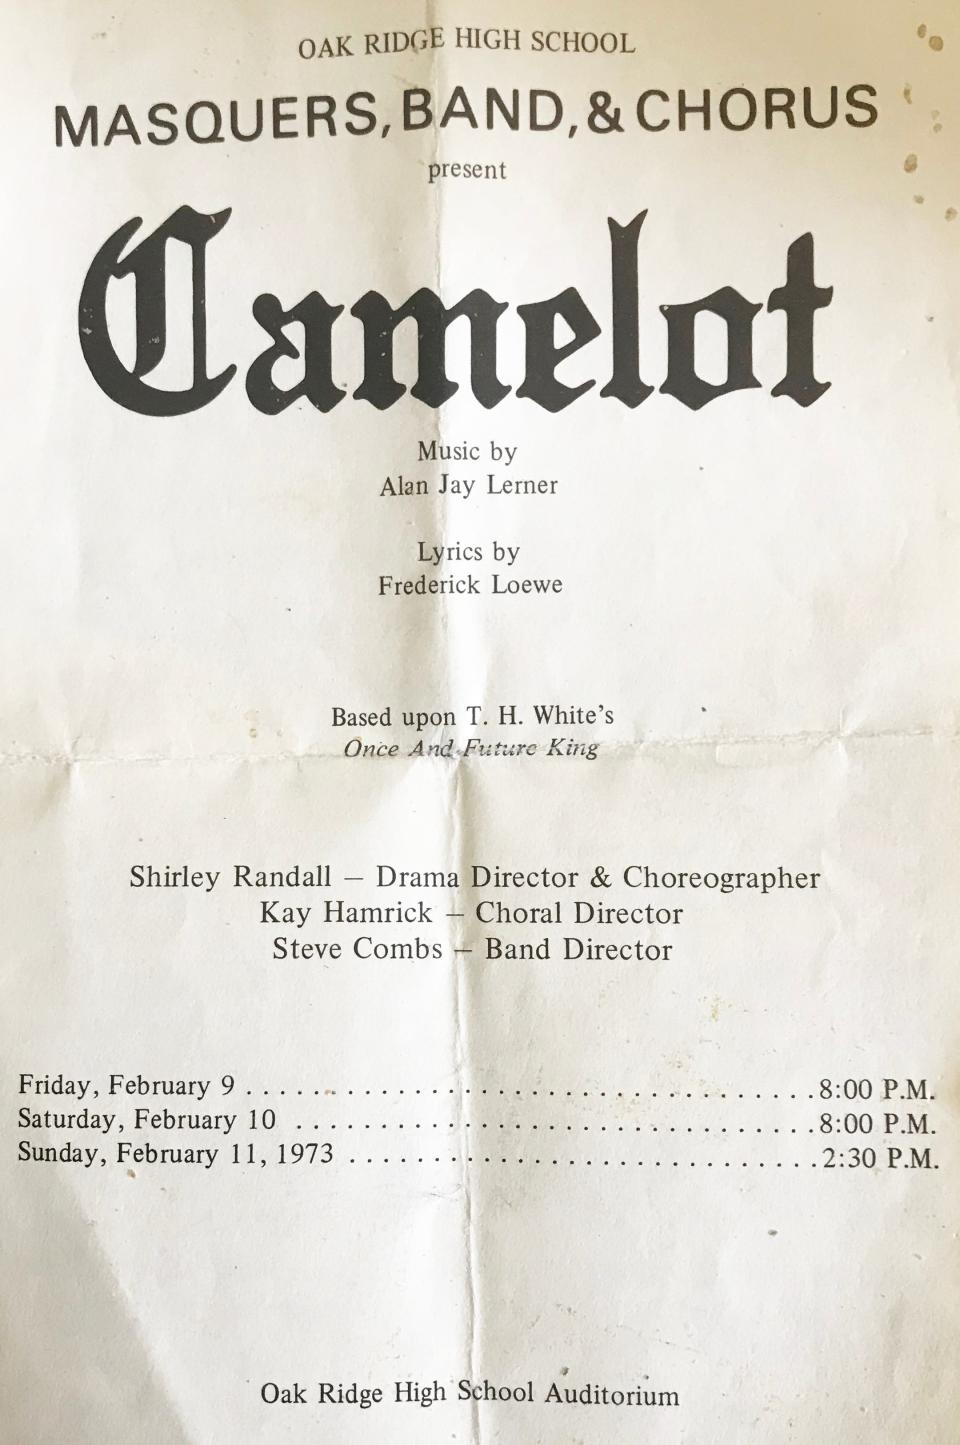 "Camelot" was produced at Oak Ridge High School when Don Bell was a student there.